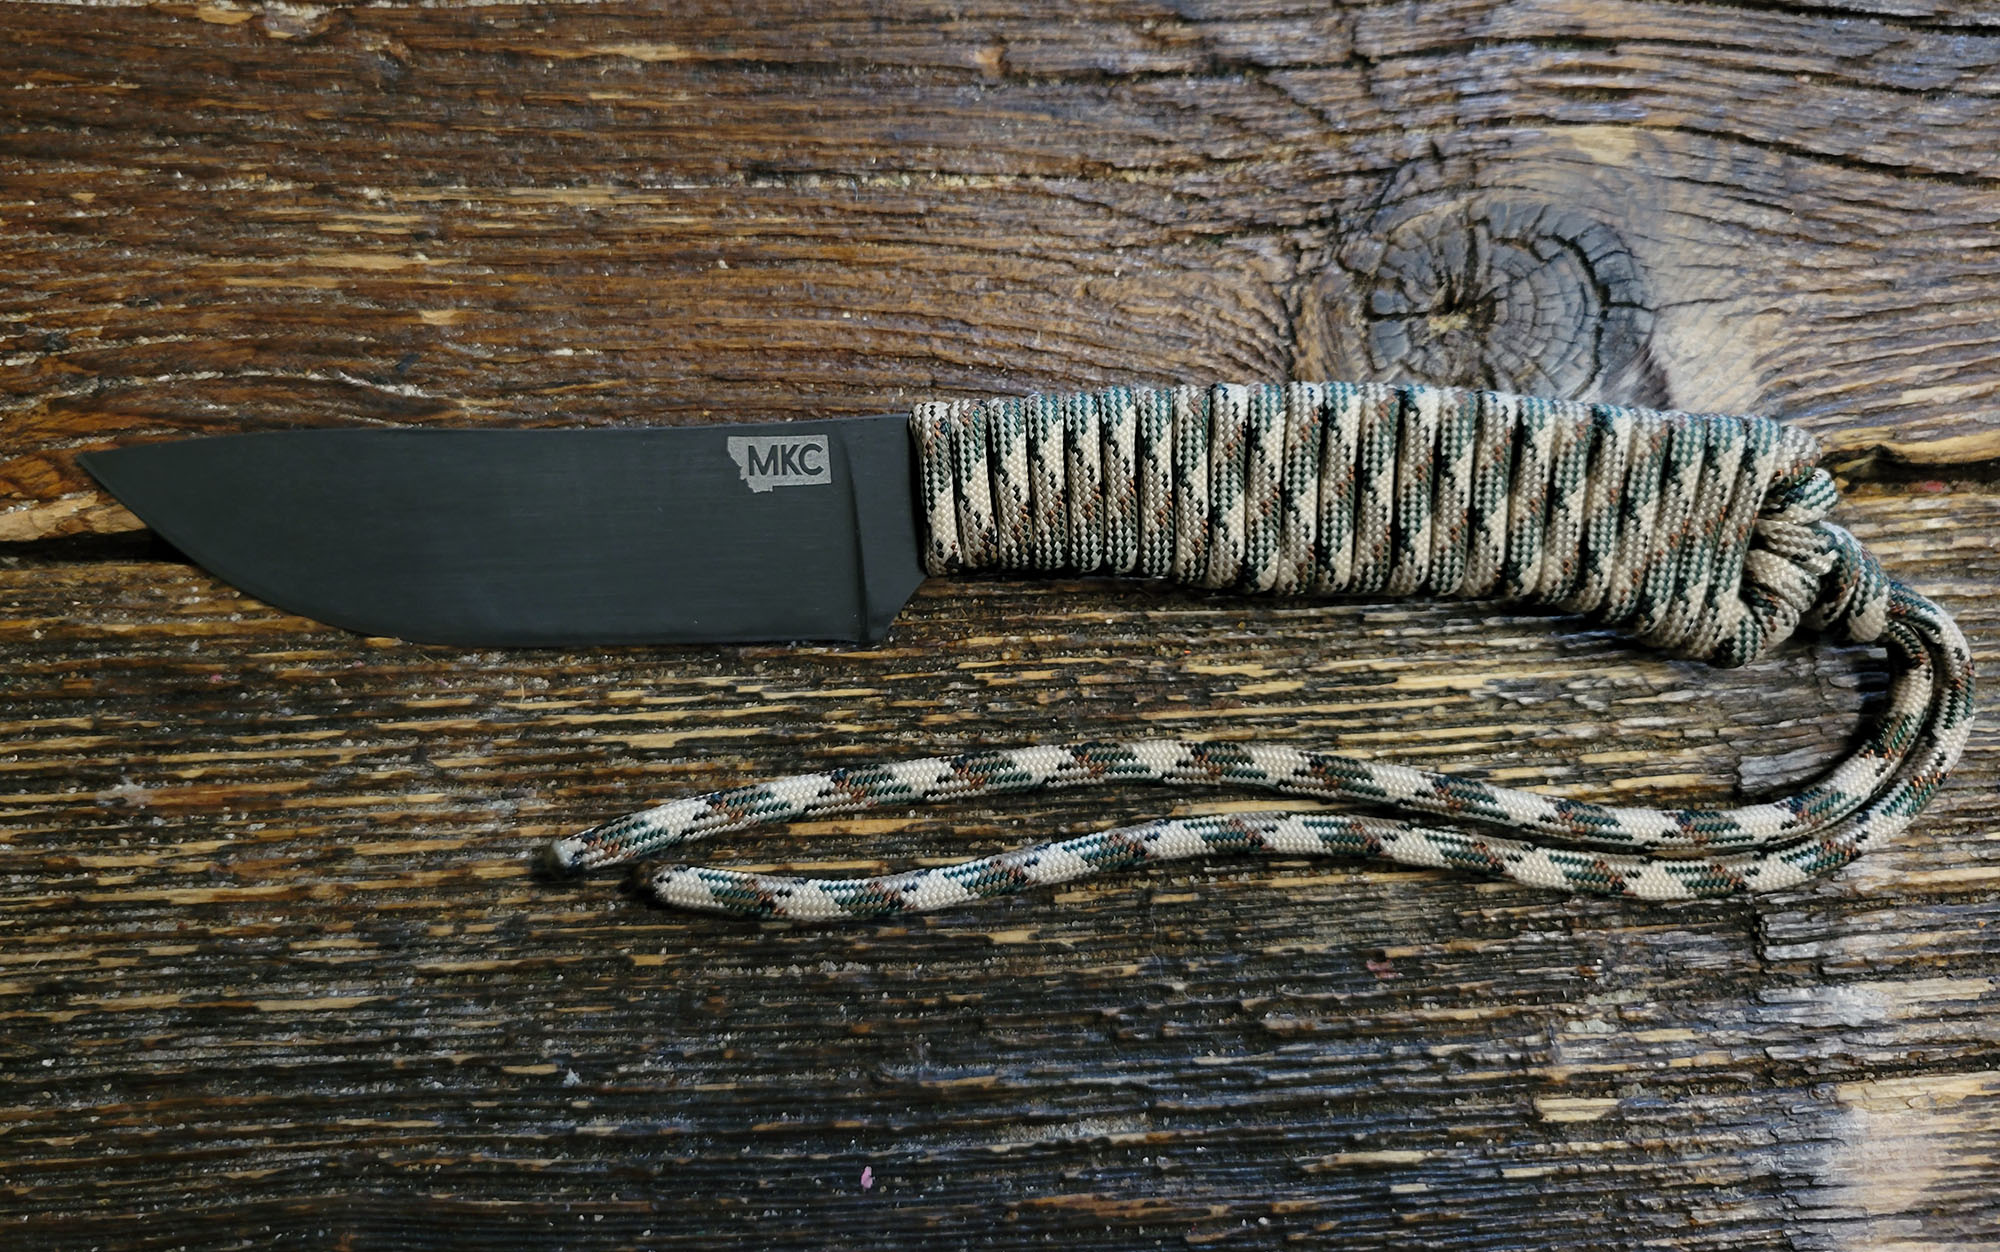 The MKC Stoned Goat includes 7 feet of paracord.